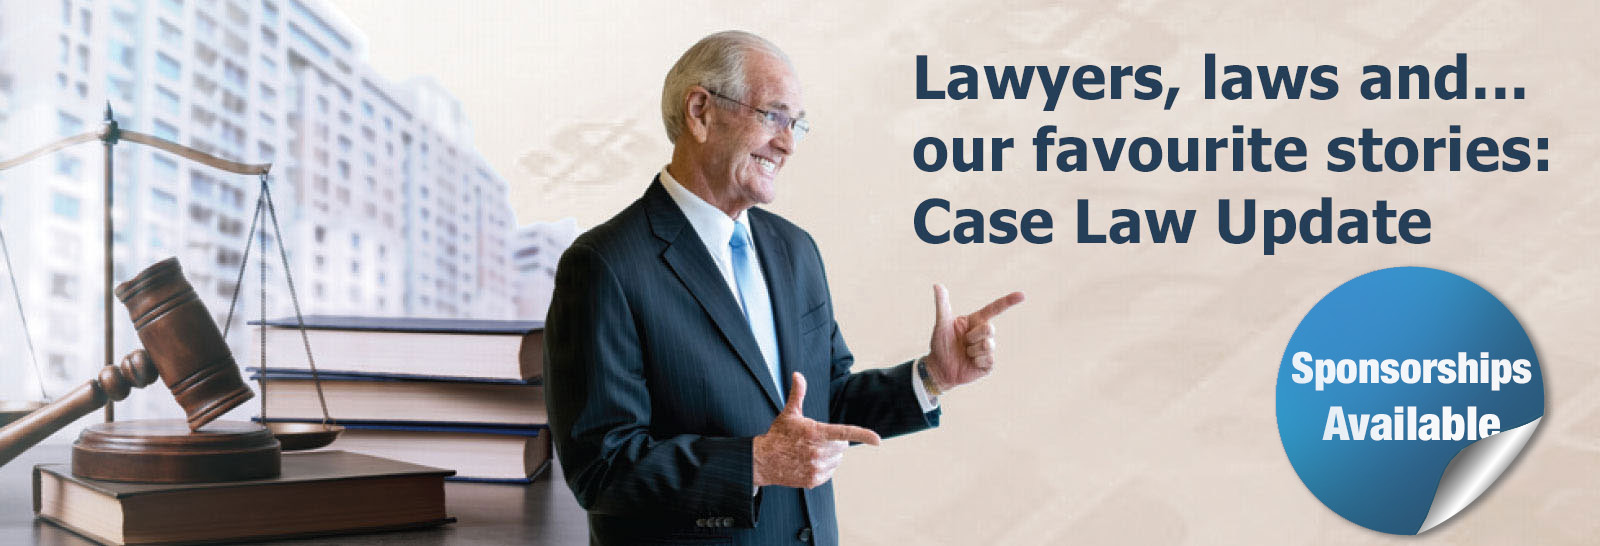 Lawyers, laws and… our favourite stories: Case Law Update